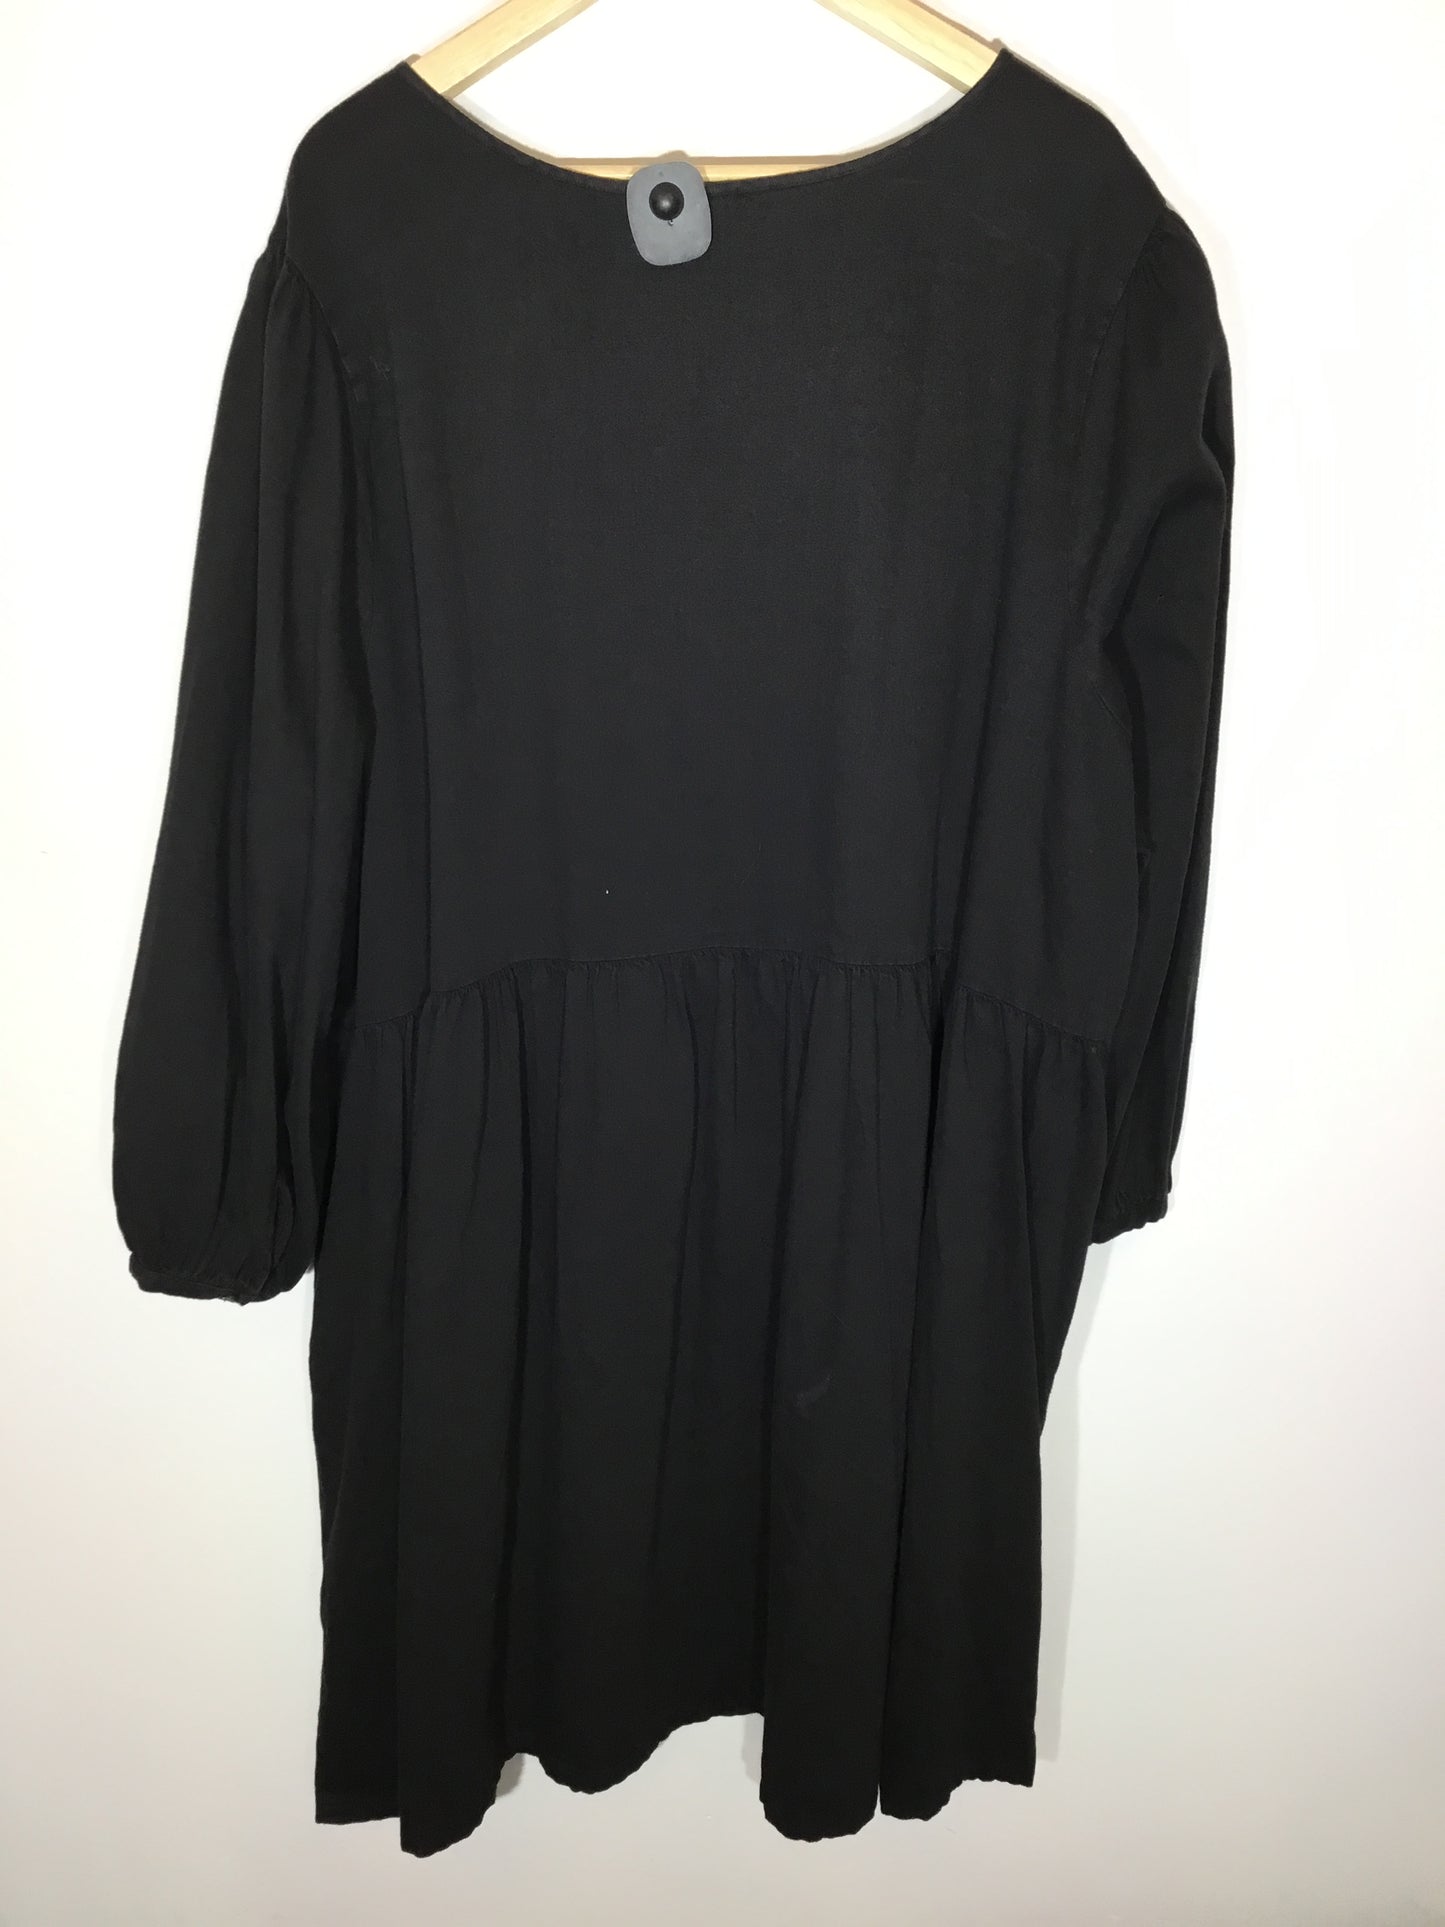 Dress Casual Midi By Old Navy  Size: 4x